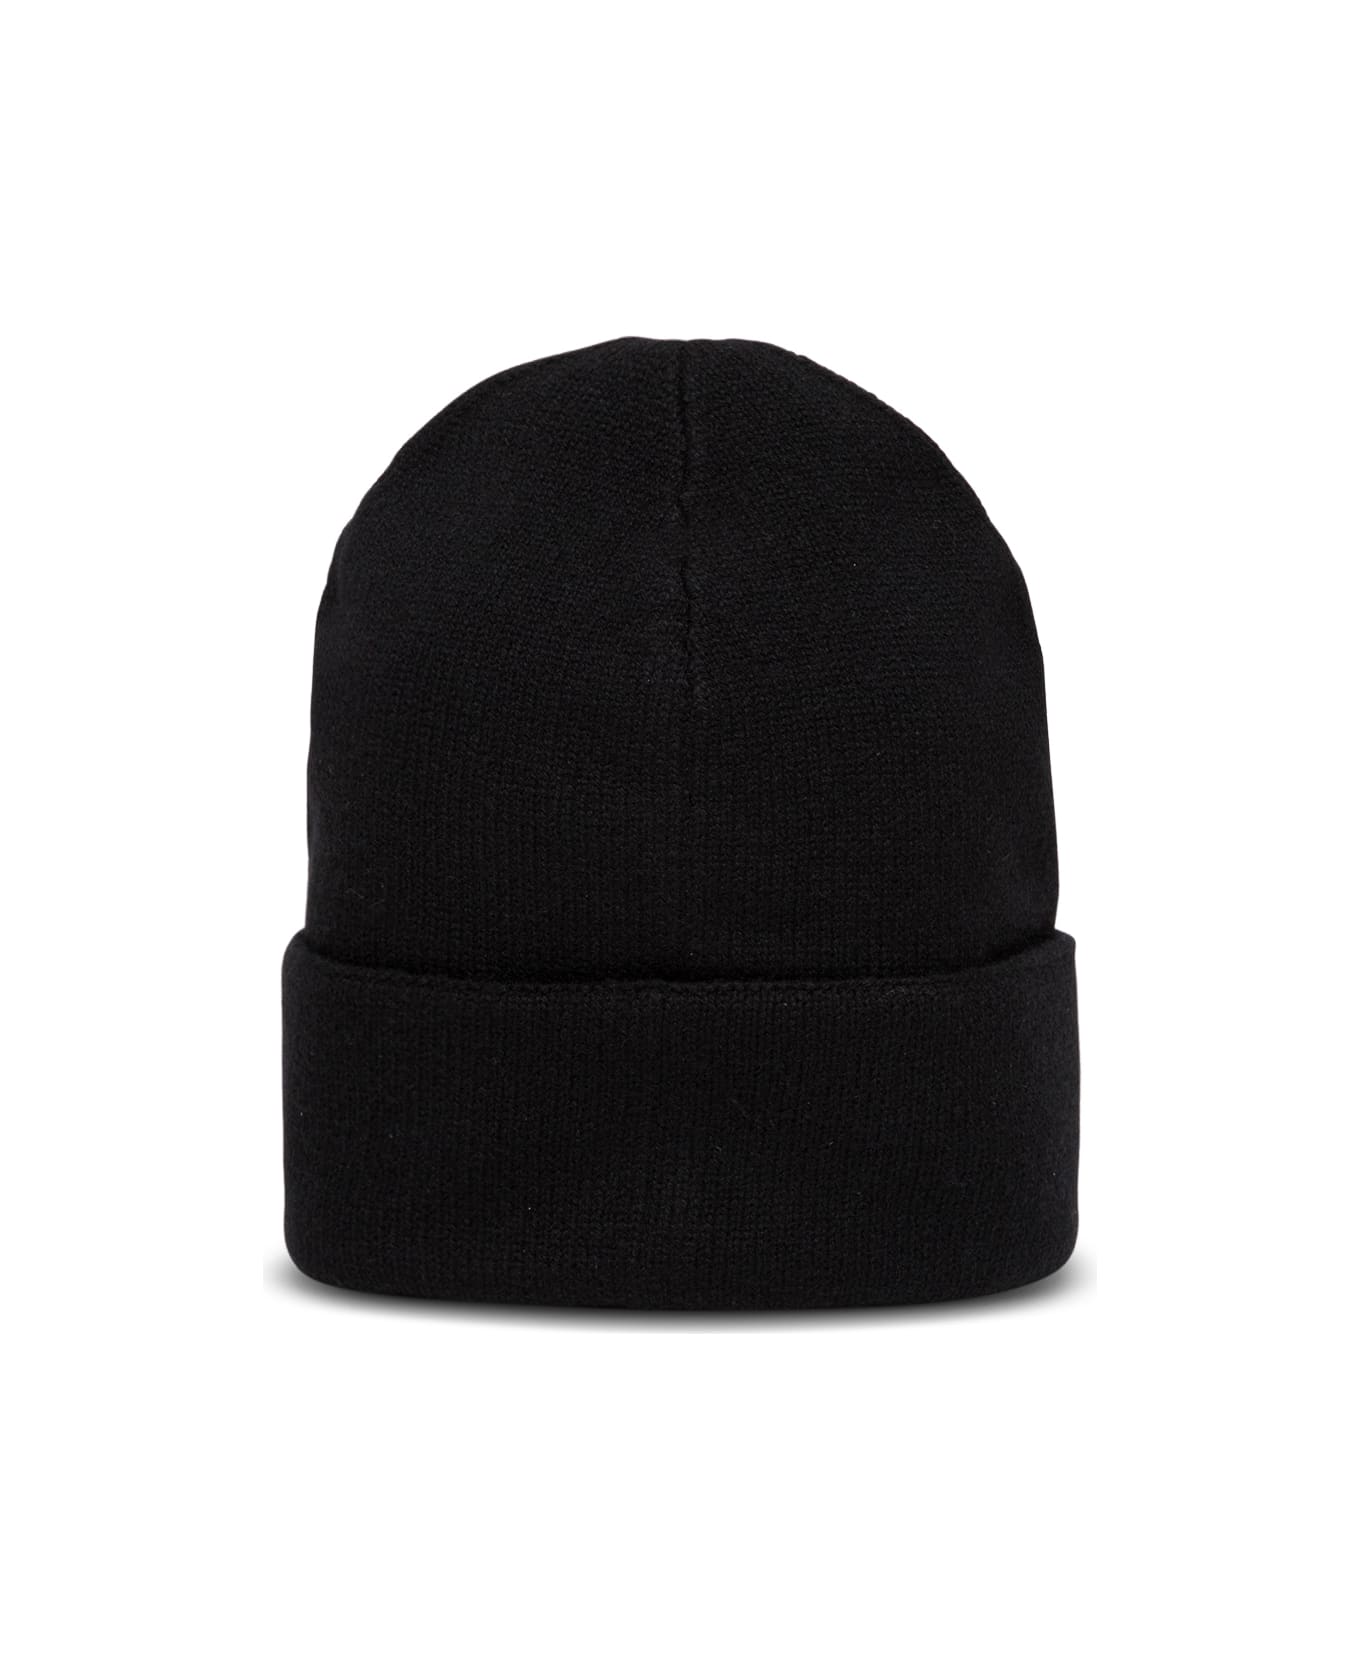 Alexander McQueen Black Wool And Cashmere Hat capa With Logo - Black